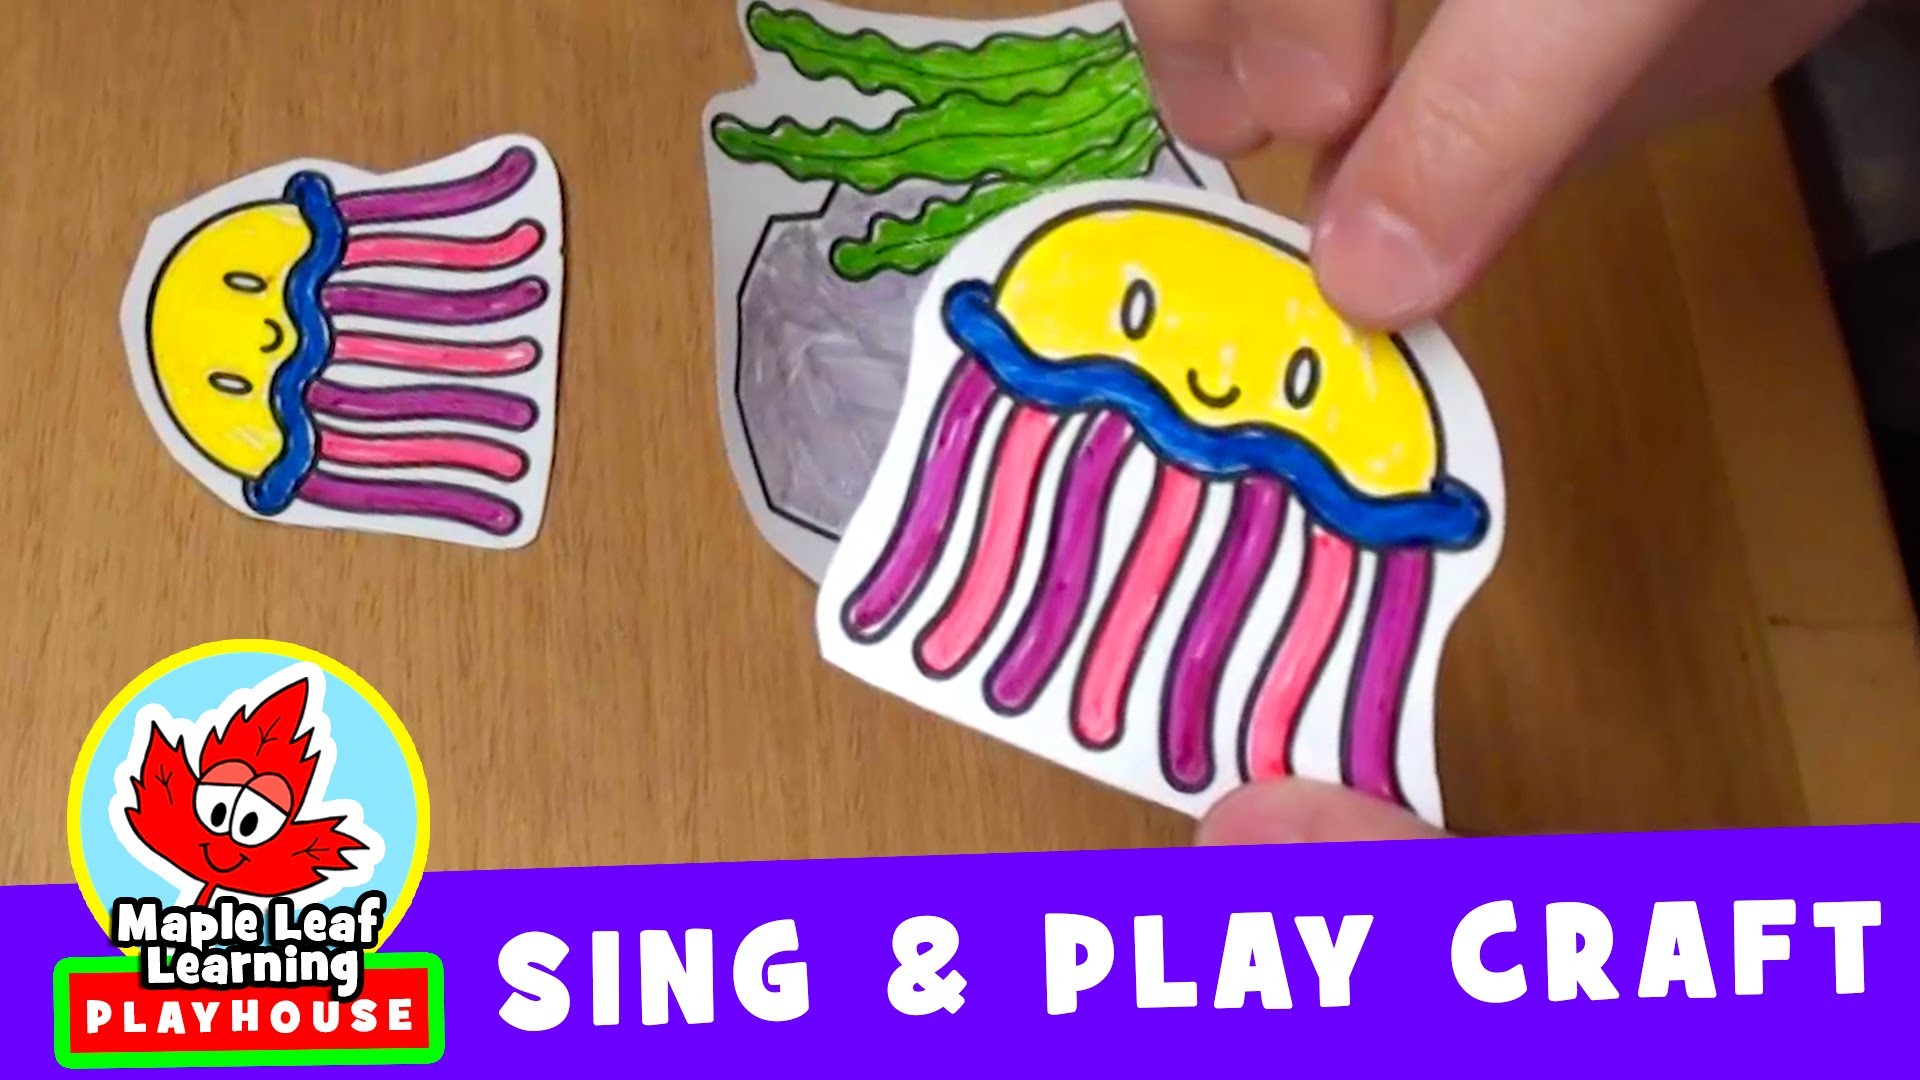 Three Jellyfish | Sing and Play Craft for Kids | Maple Leaf Learning Playhouse